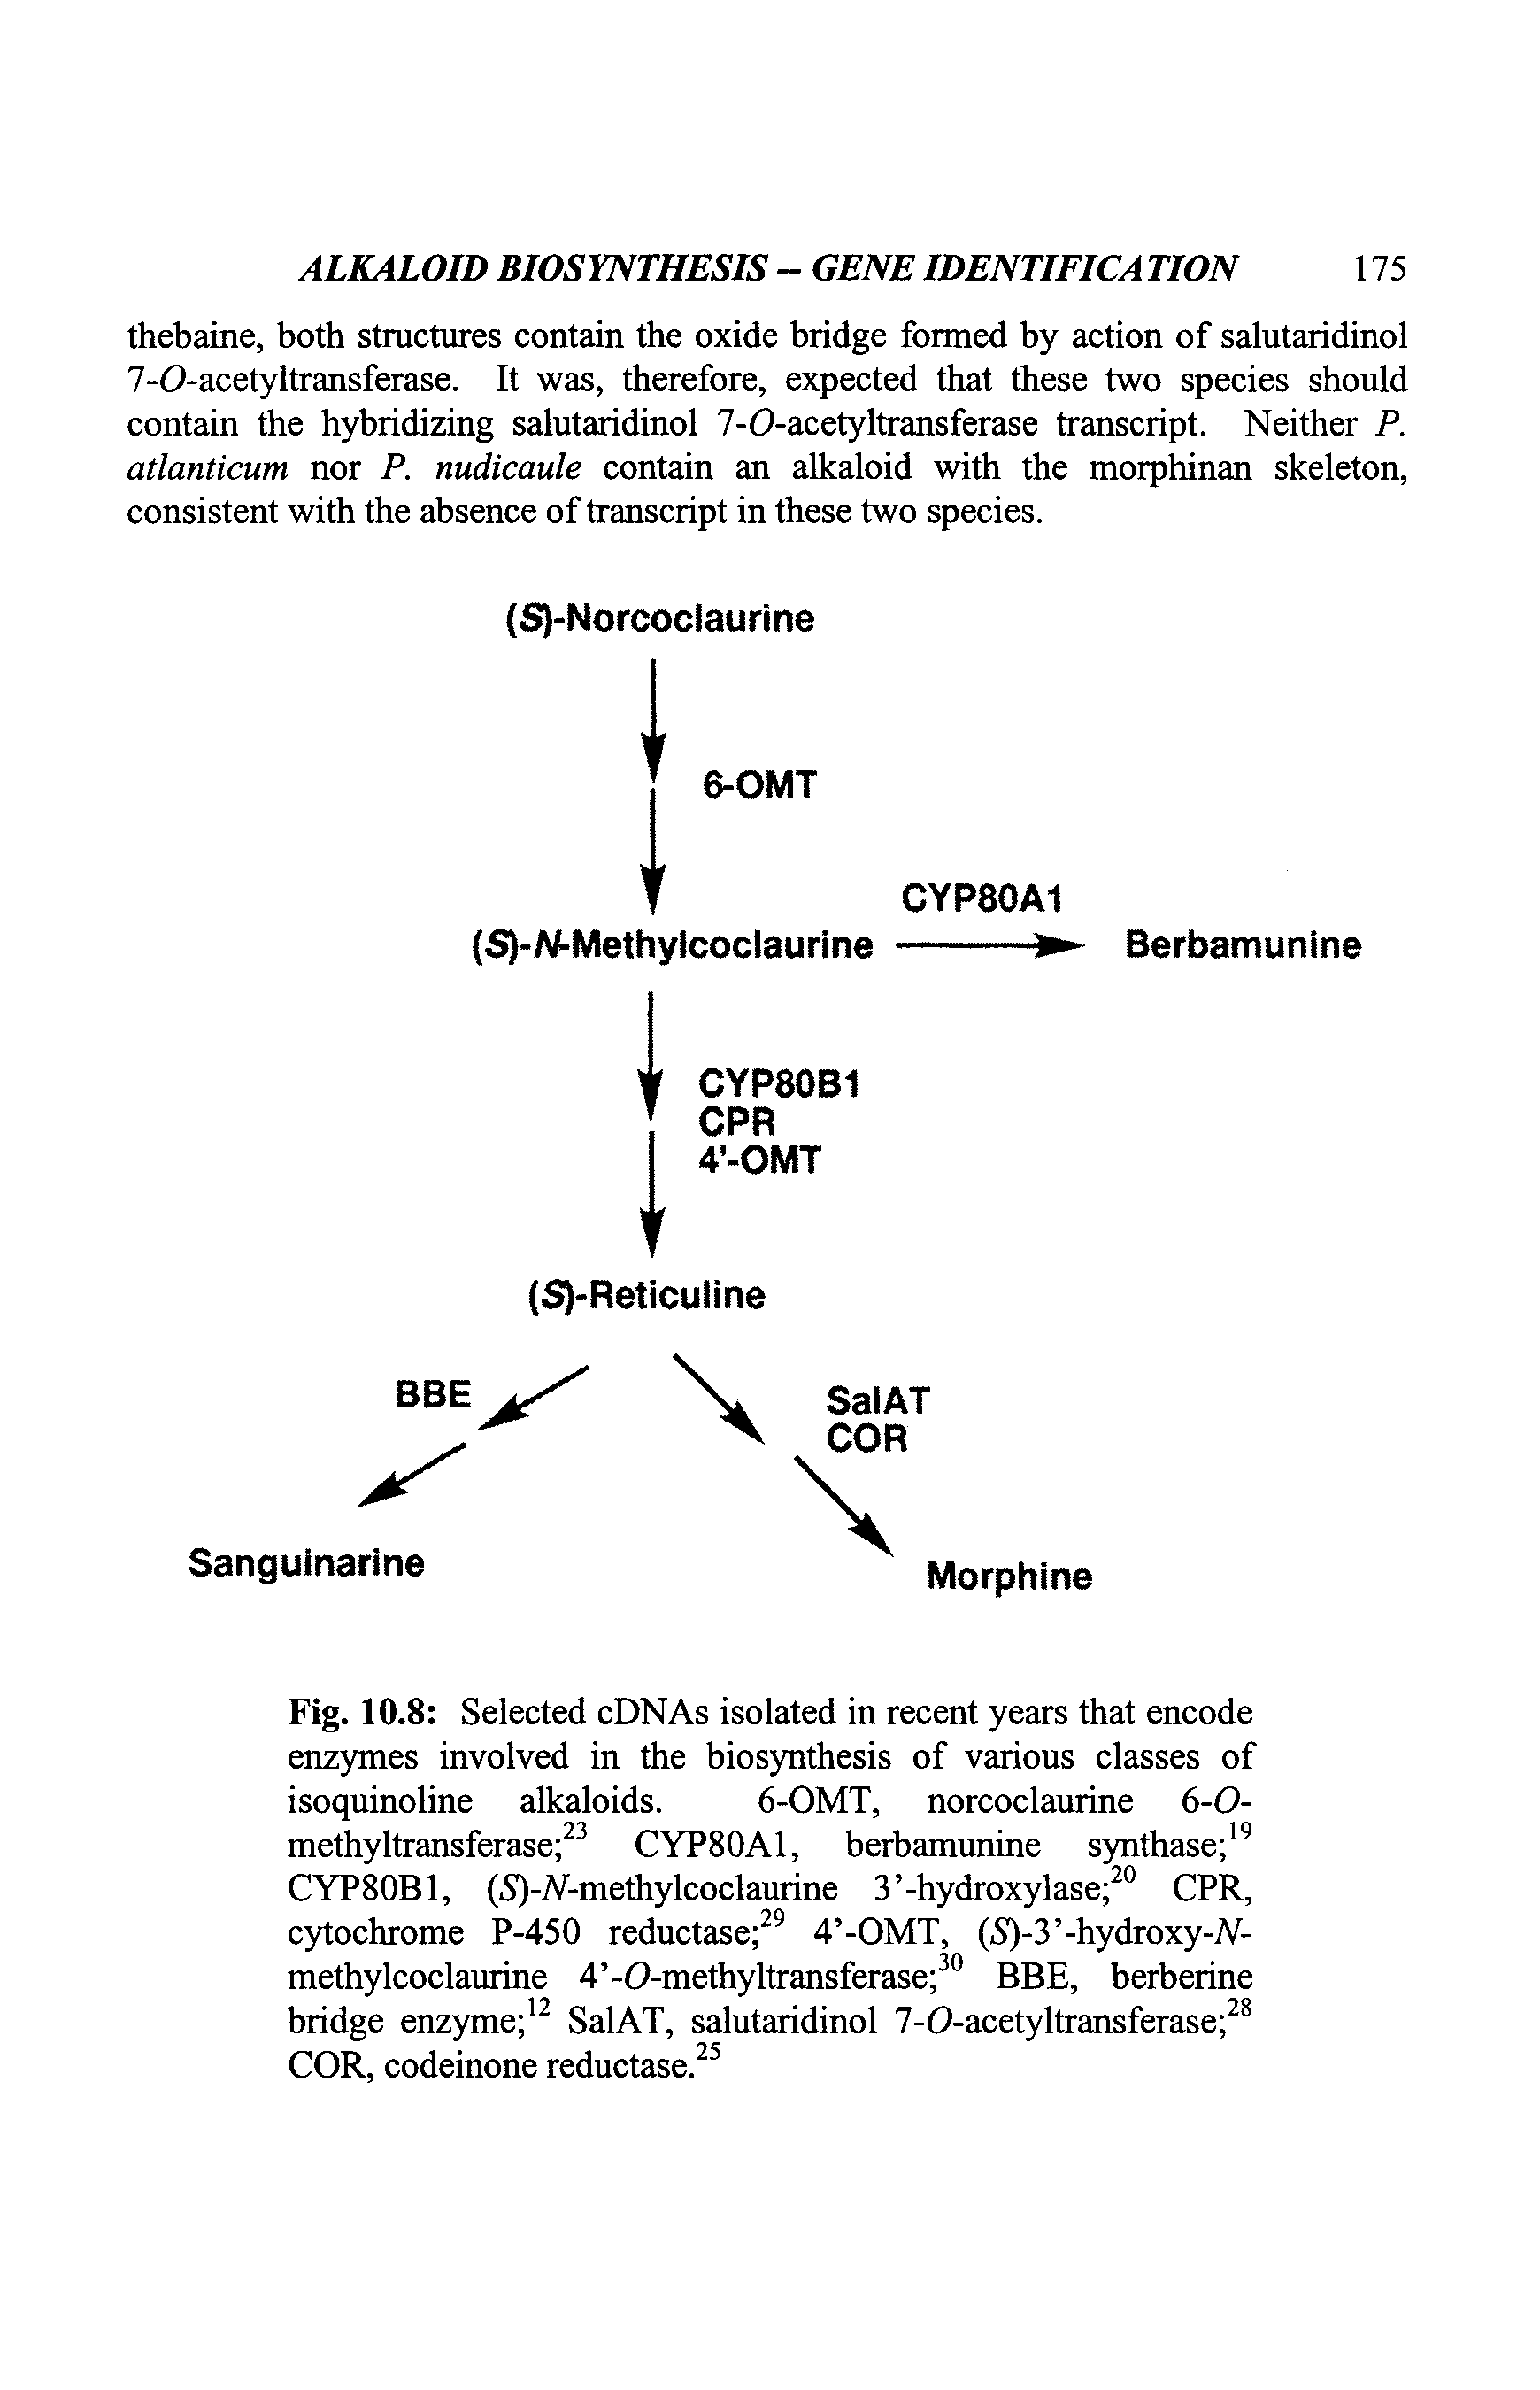 Fig. 10.8 Selected cDNAs isolated in recent years that encode enzymes involved in the biosynthesis of various classes of isoquinoline alkaloids. 6-OMT, norcoclaurine 6-0-methyltransferase 23 CYP80A1, berbamunine synthase 19 CYP80B1, (S)-A-methylcoclaurine 3 -hydroxylase 20 CPR, cytochrome P-450 reductase 29 4 -OMT, (5)-3 -hydroxy-A-methylcoclaurine 4 -0-methyltransferase 30 BBE, berberine bridge enzyme 12 SalAT, salutaridinol 7-O-acetyltransferase 28 COR, codeinone reductase.25...